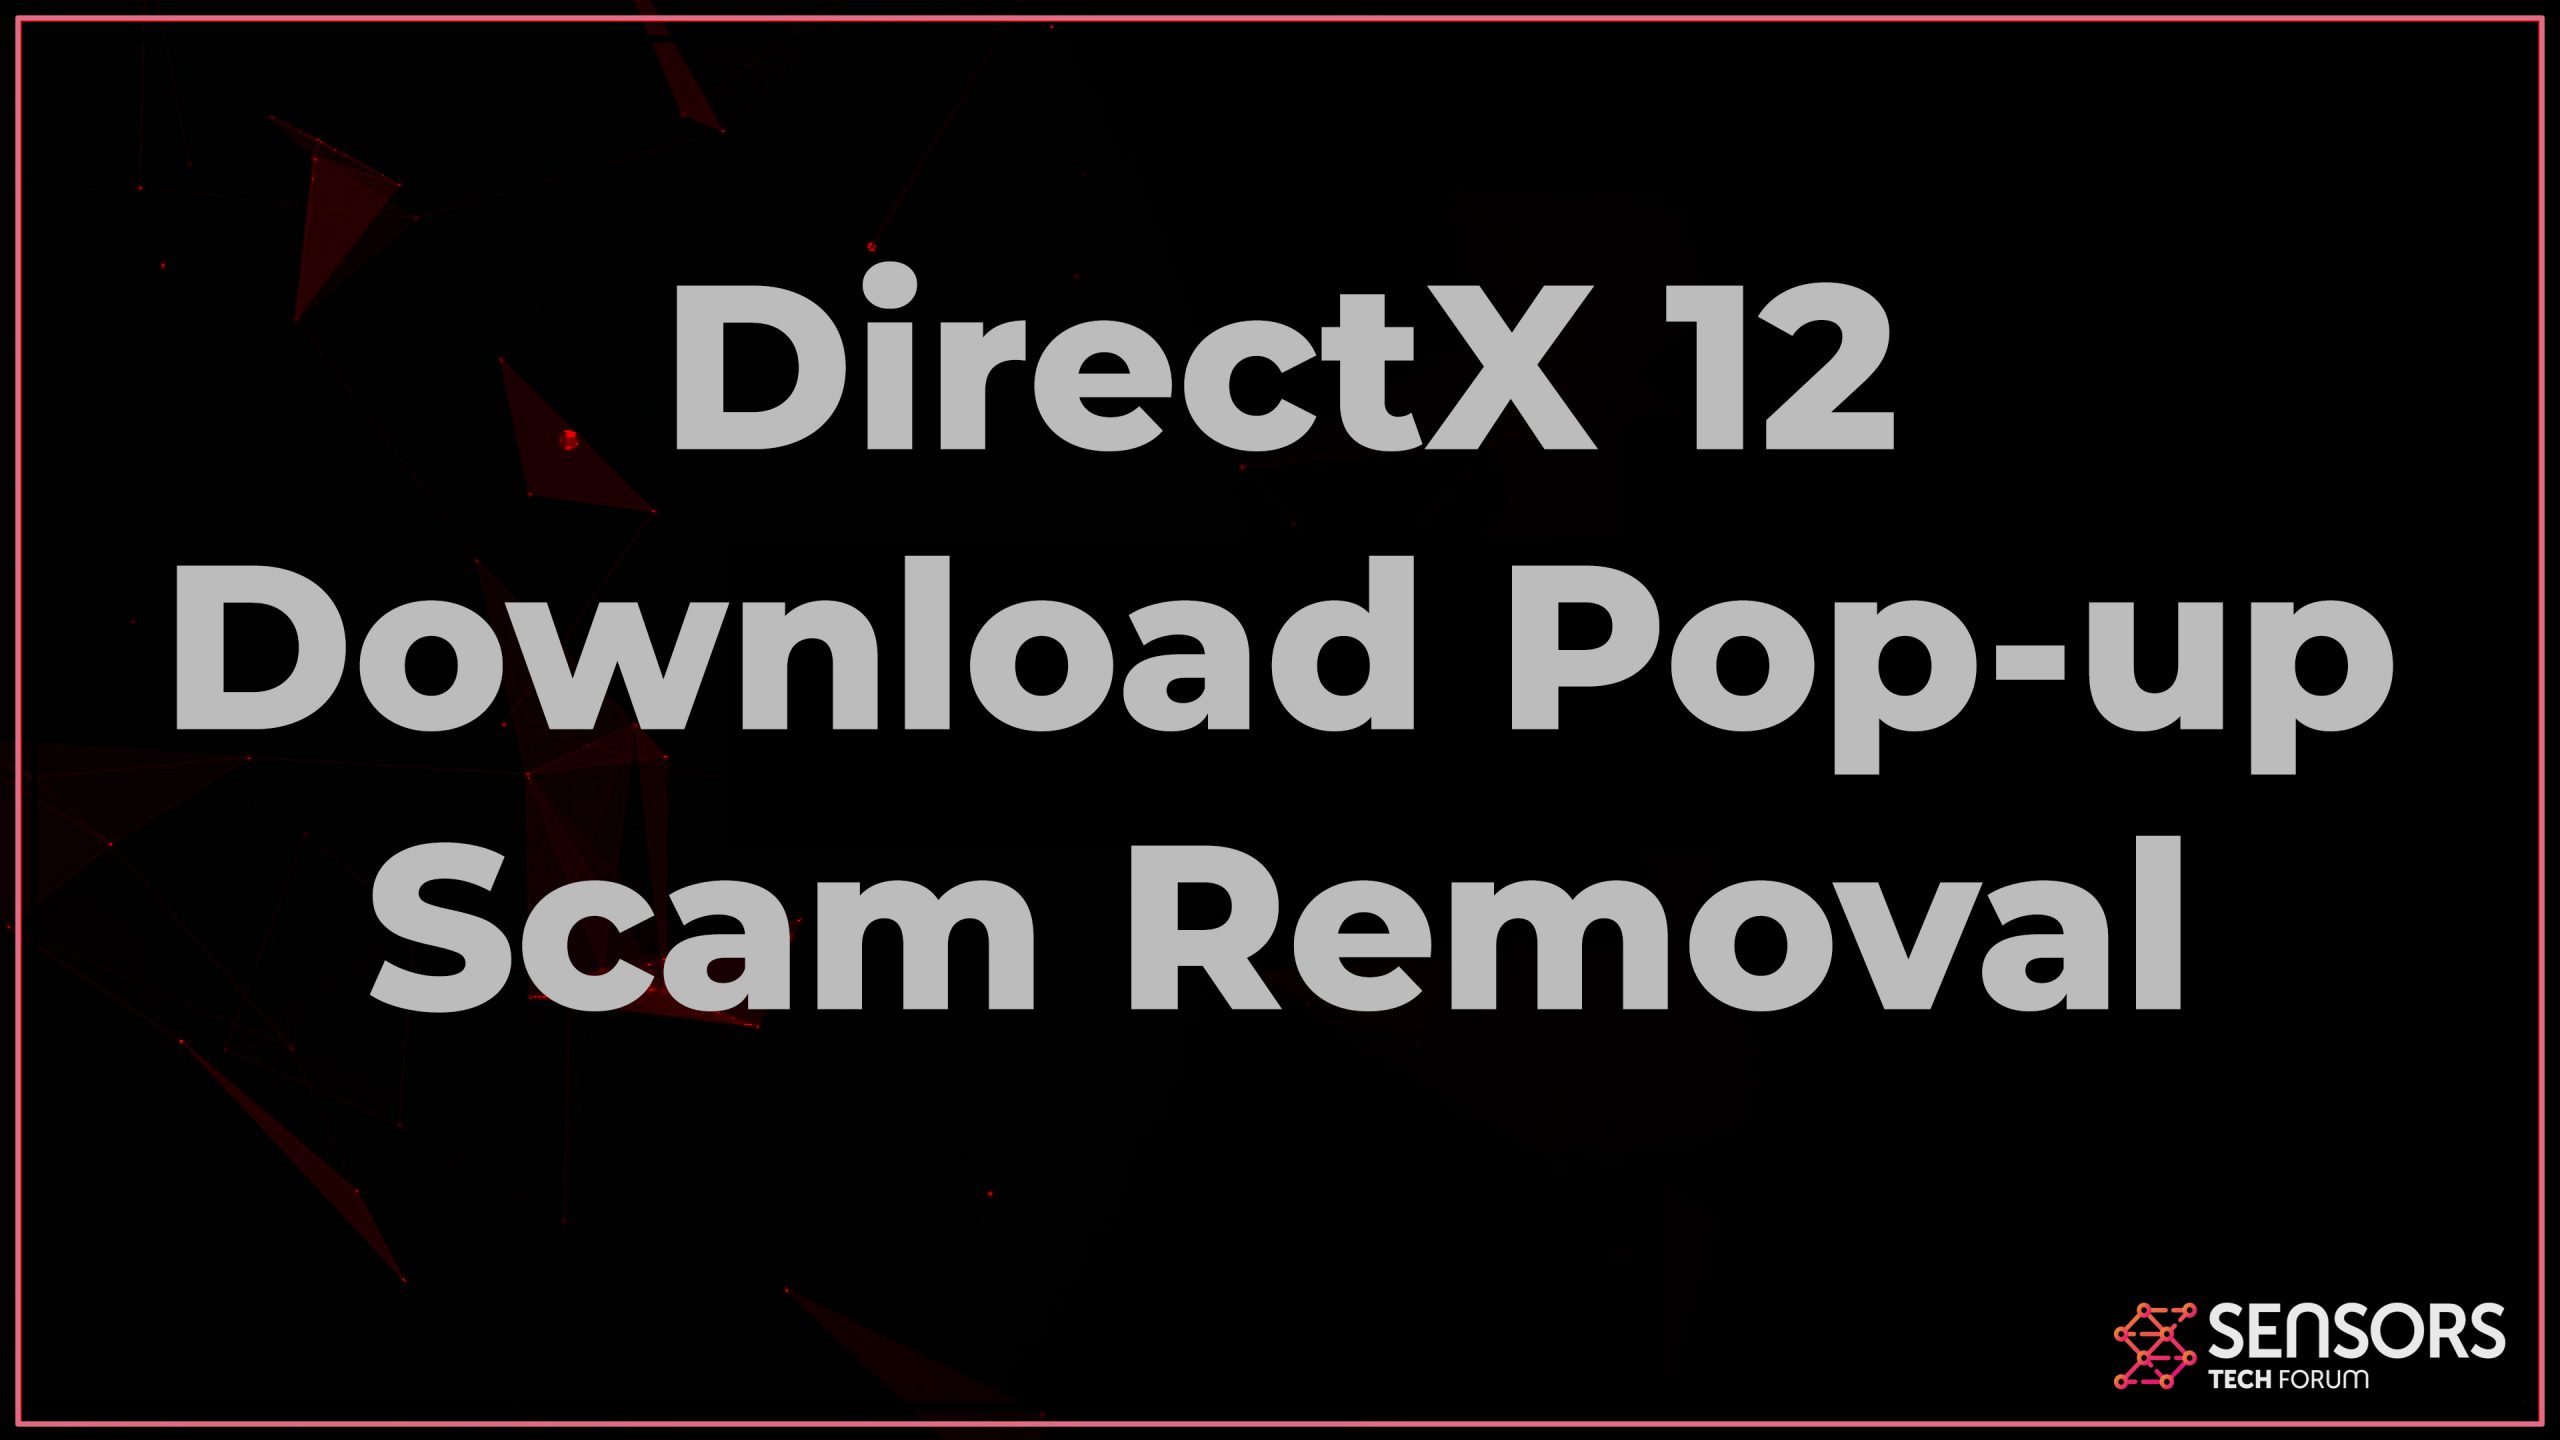 DirectX 12 Download Scam Pop-up Removal Guide [ Free Fix Steps ]